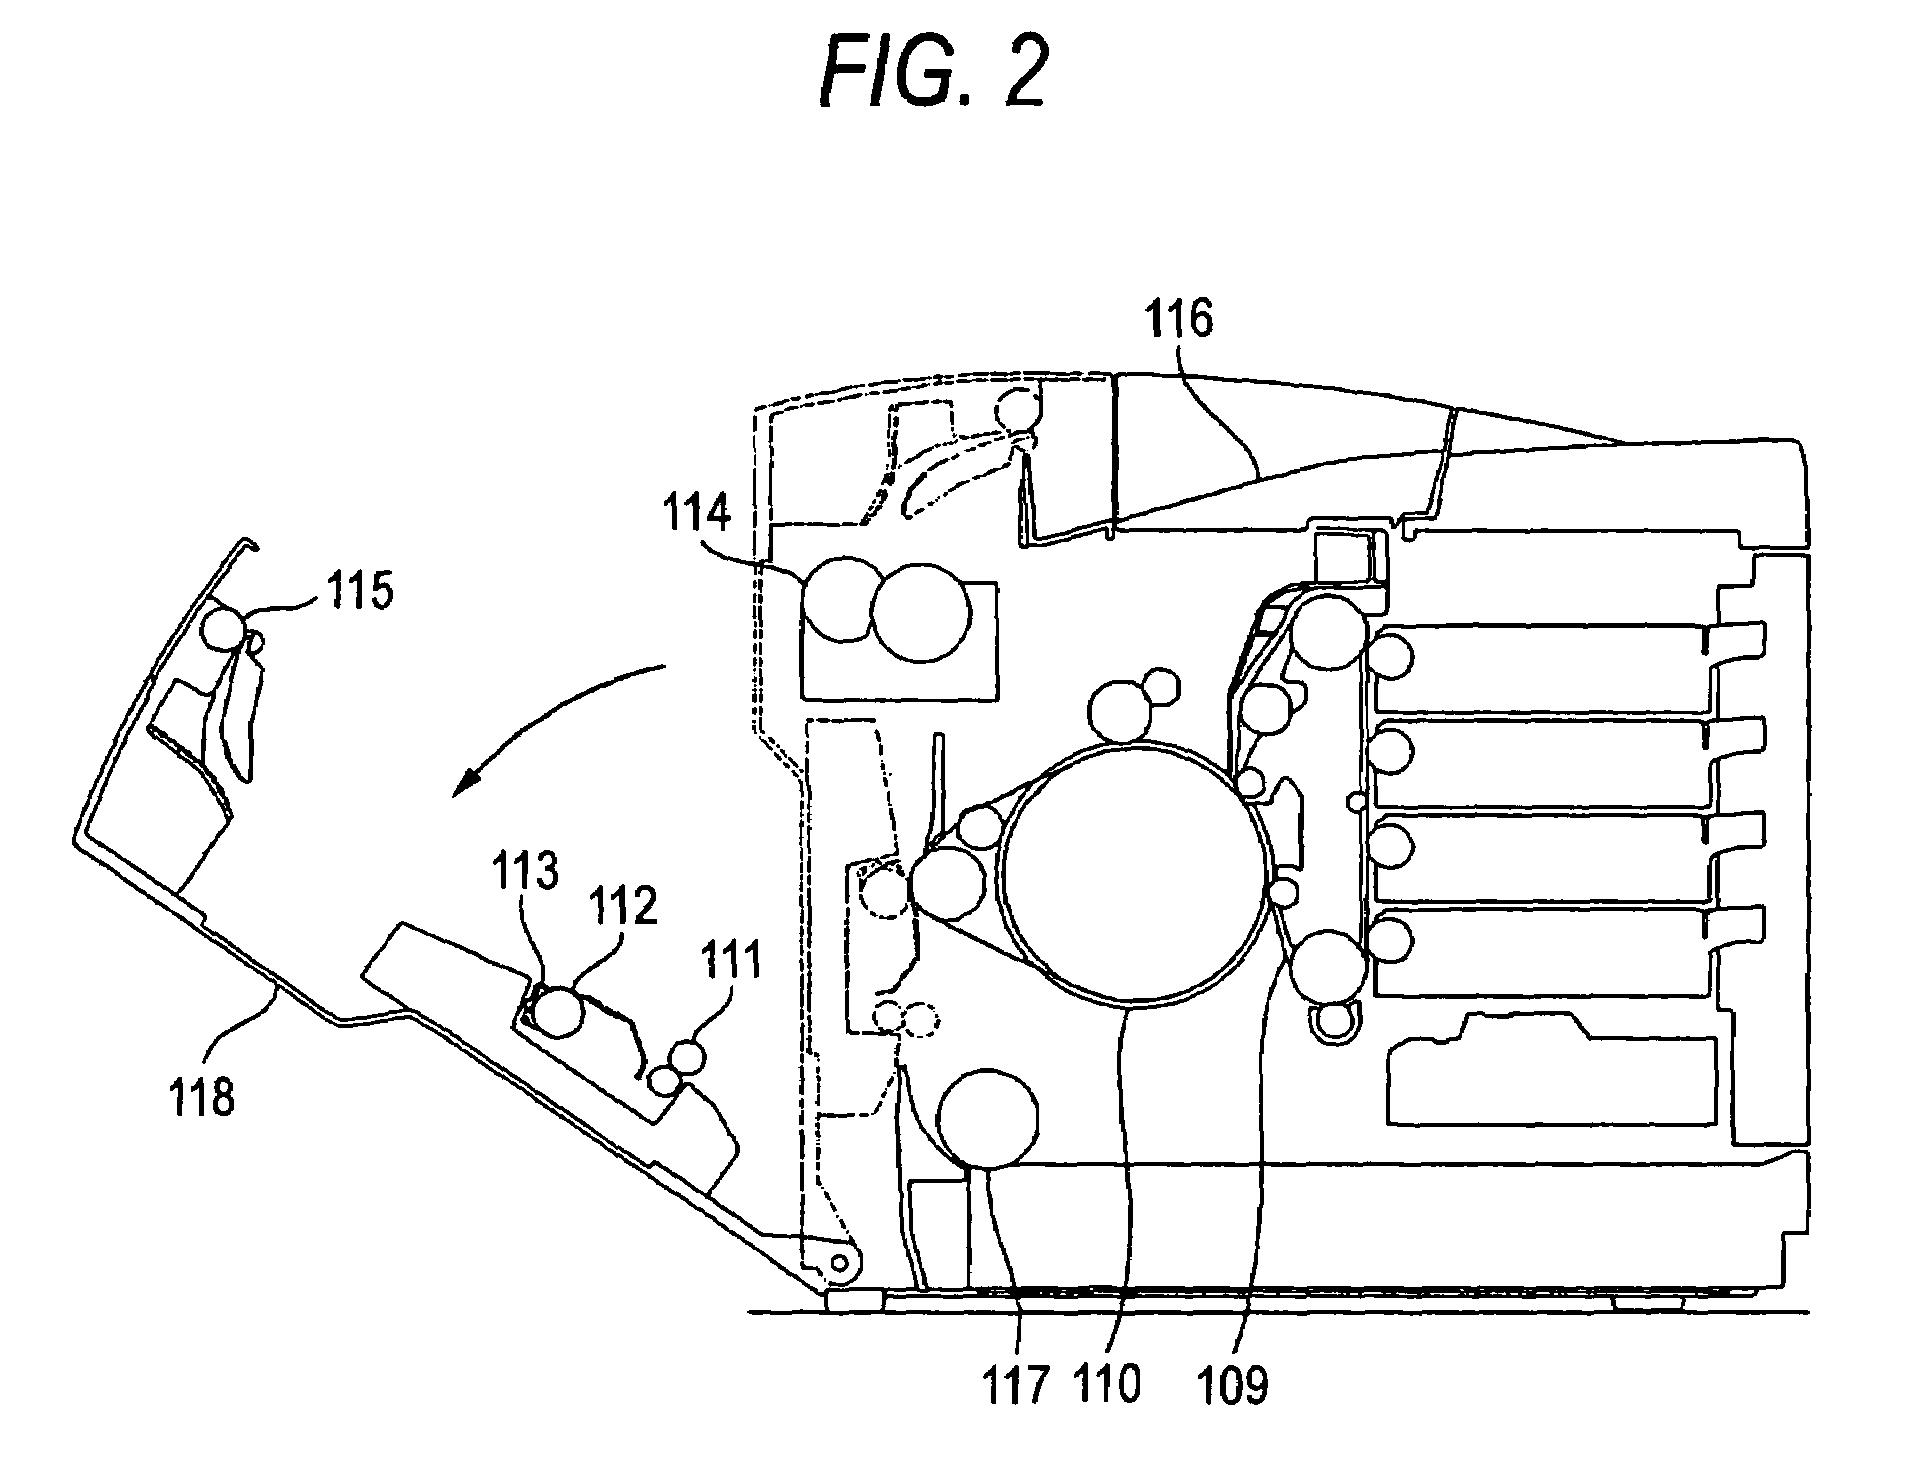 Image forming apparatus having a sheet removal portion